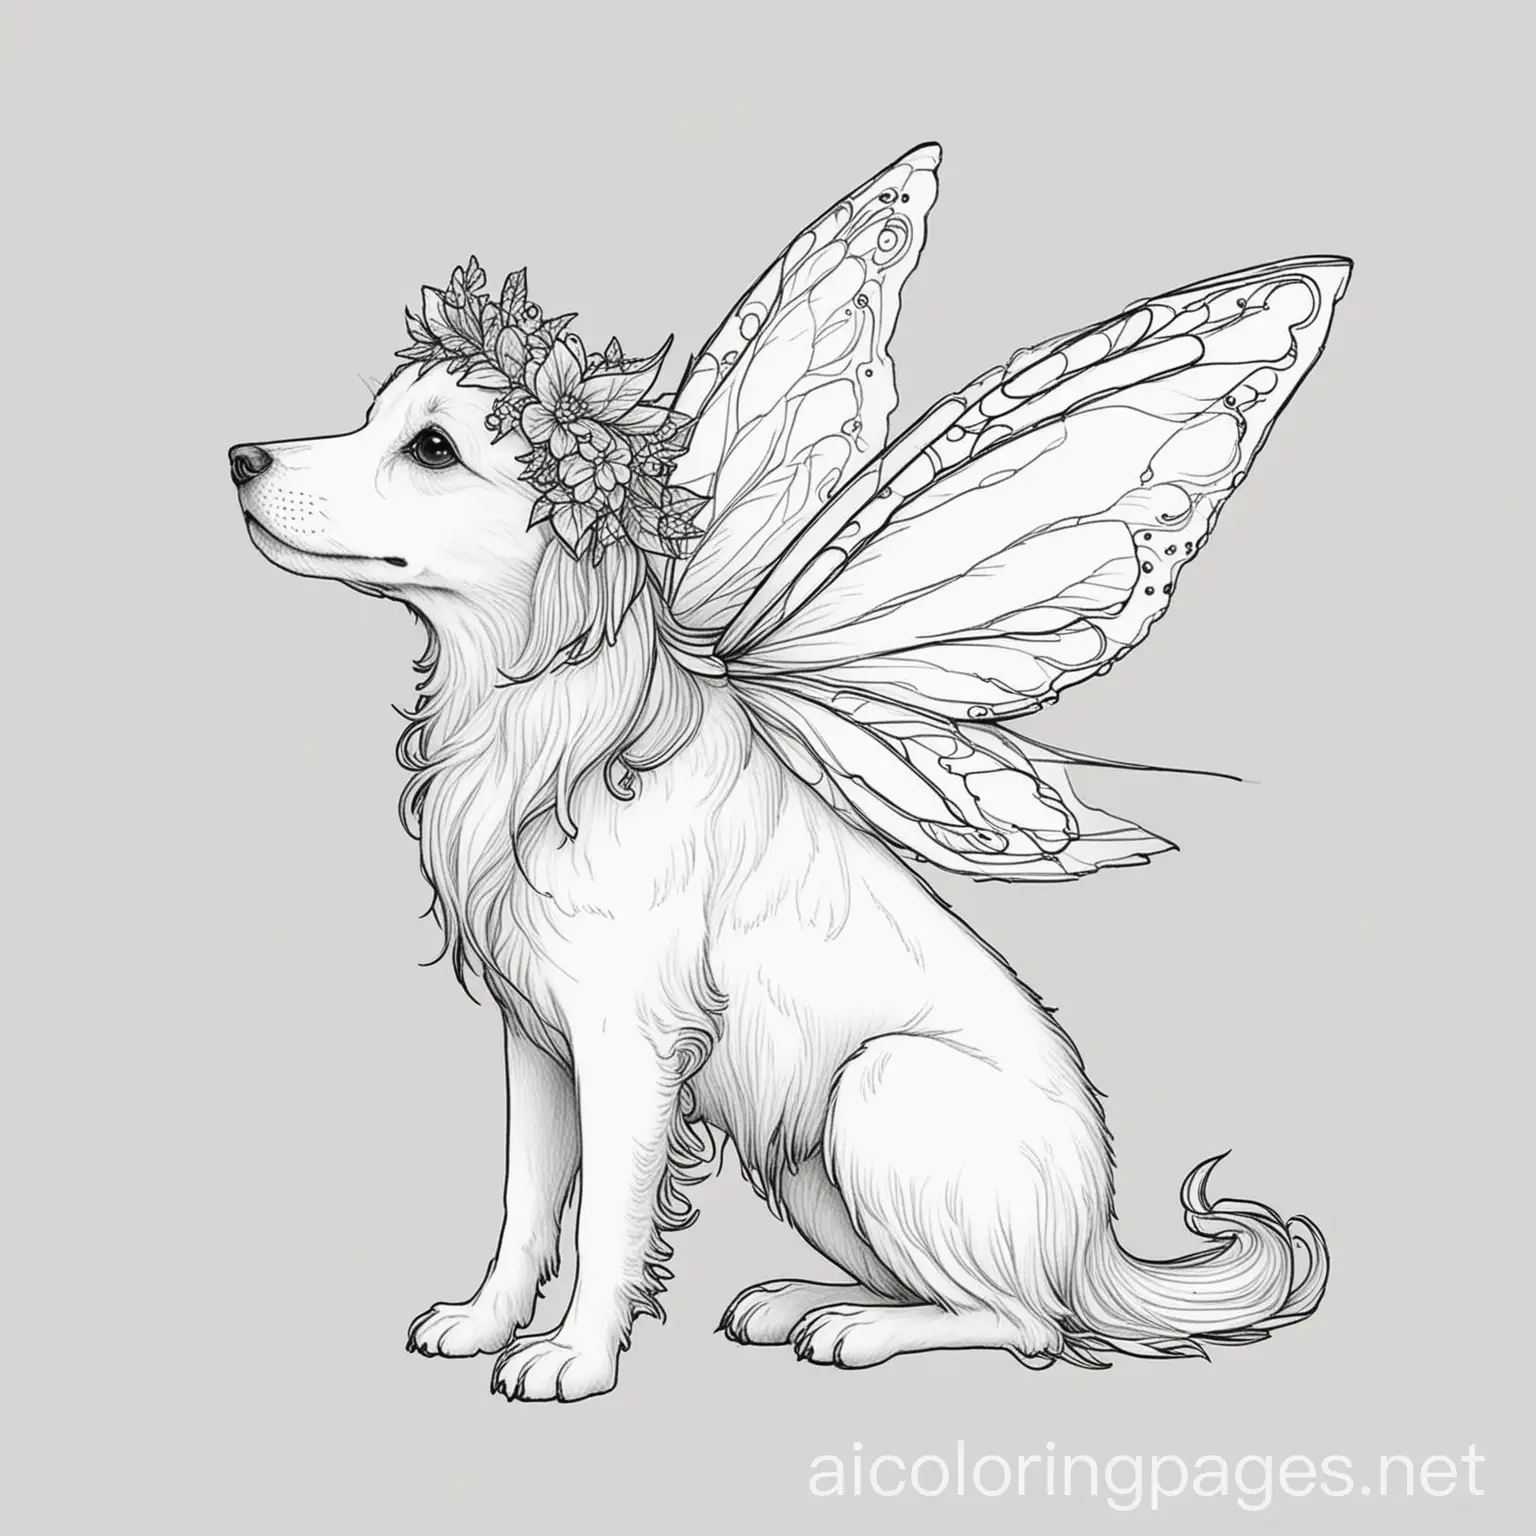 Fairy dog, Coloring Page, black and white, line art, white background, Simplicity, Ample White Space